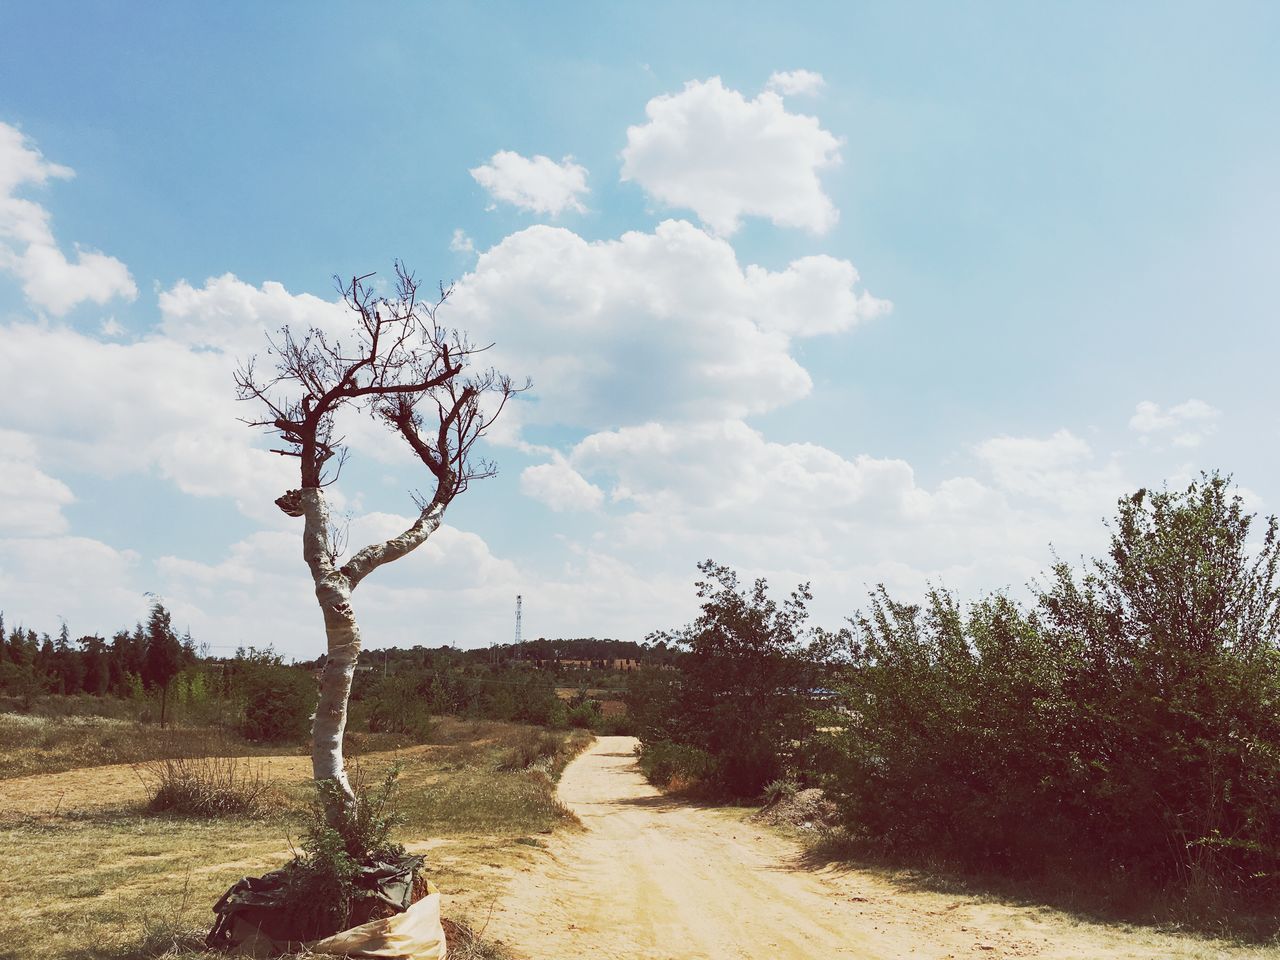 sky, tree, tranquility, landscape, tranquil scene, dirt road, nature, the way forward, cloud - sky, cloud, bare tree, field, growth, scenics, beauty in nature, day, non-urban scene, branch, sunlight, non urban scene